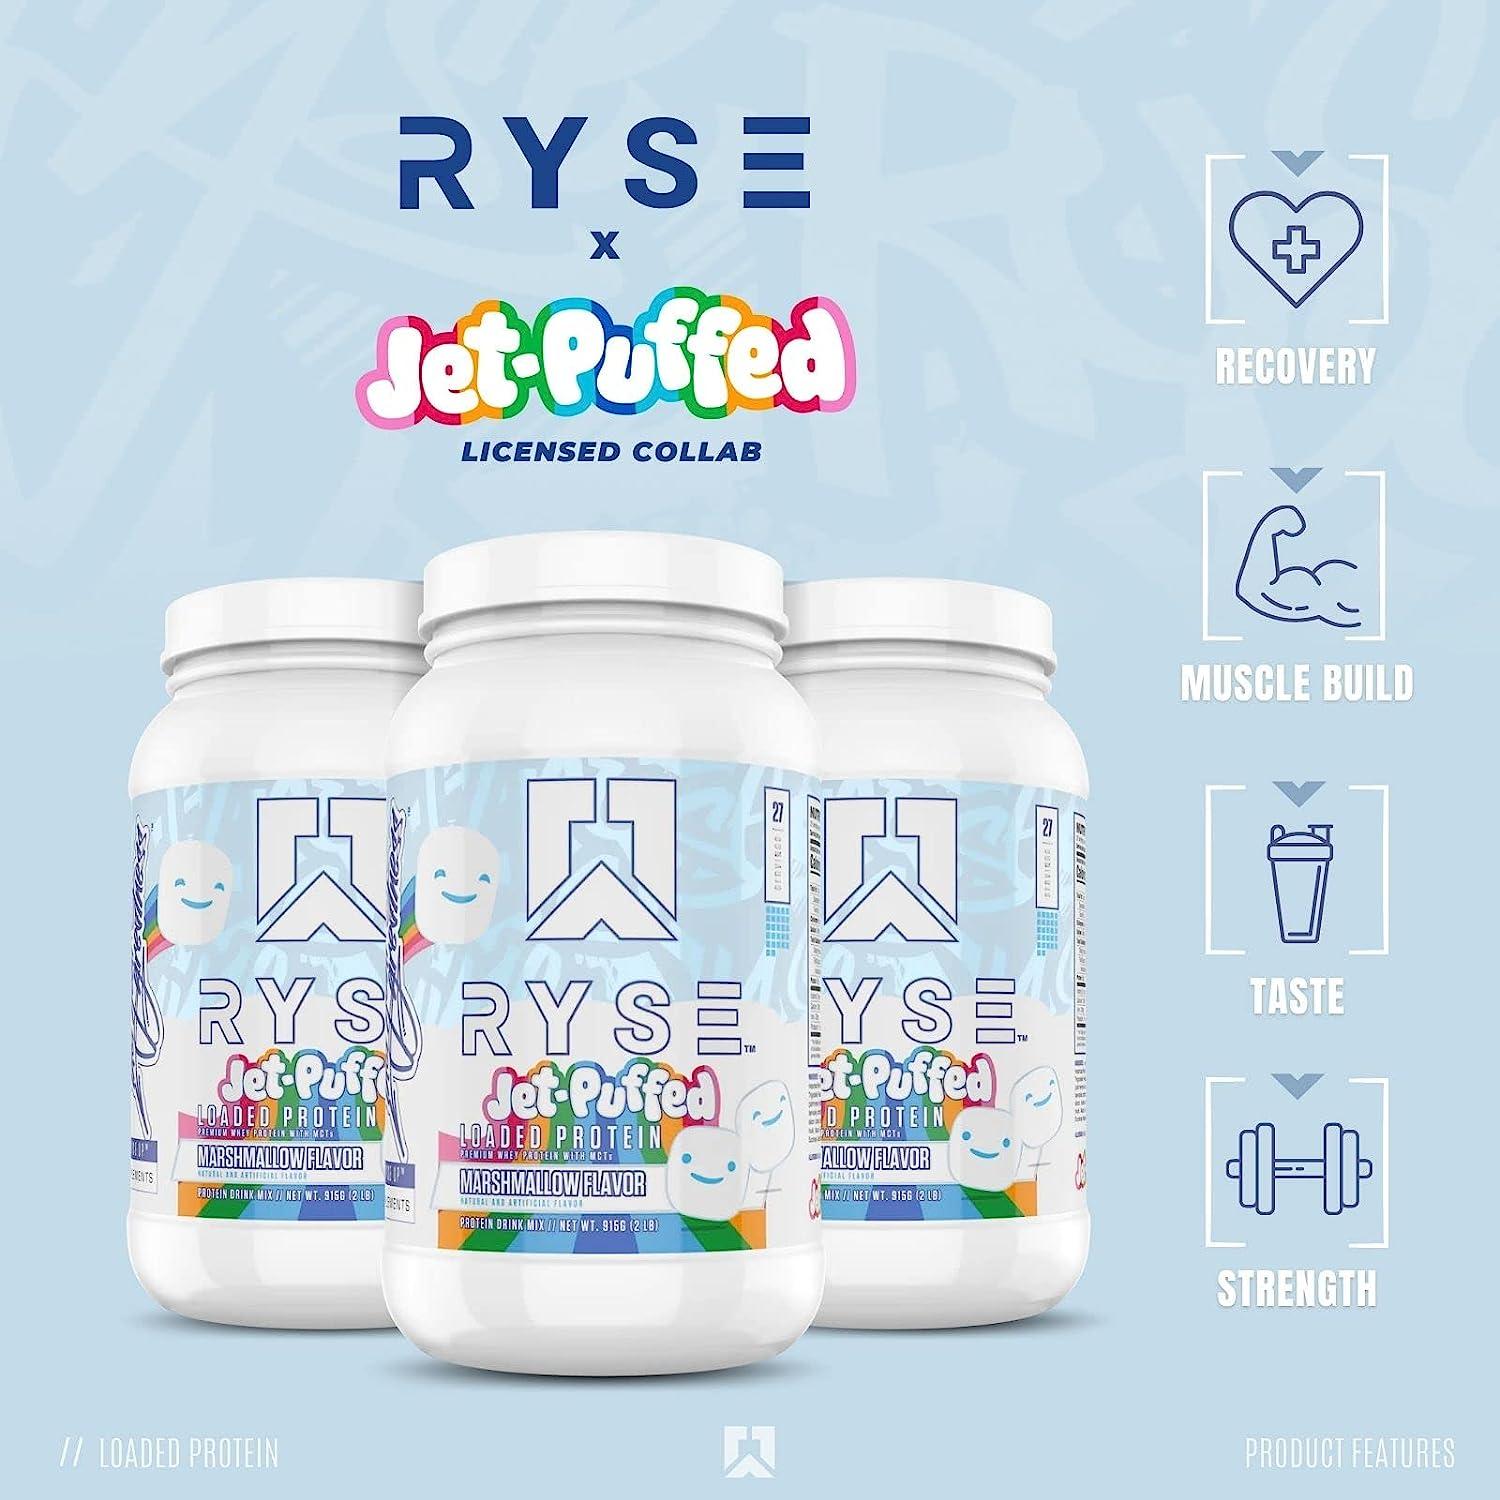 RYSE Core Series Loaded Protein, Build Recover Strength, 25g Whey Protein, Added Prebiotic Fiber and MCTs, Low Carbs & Low Sugar